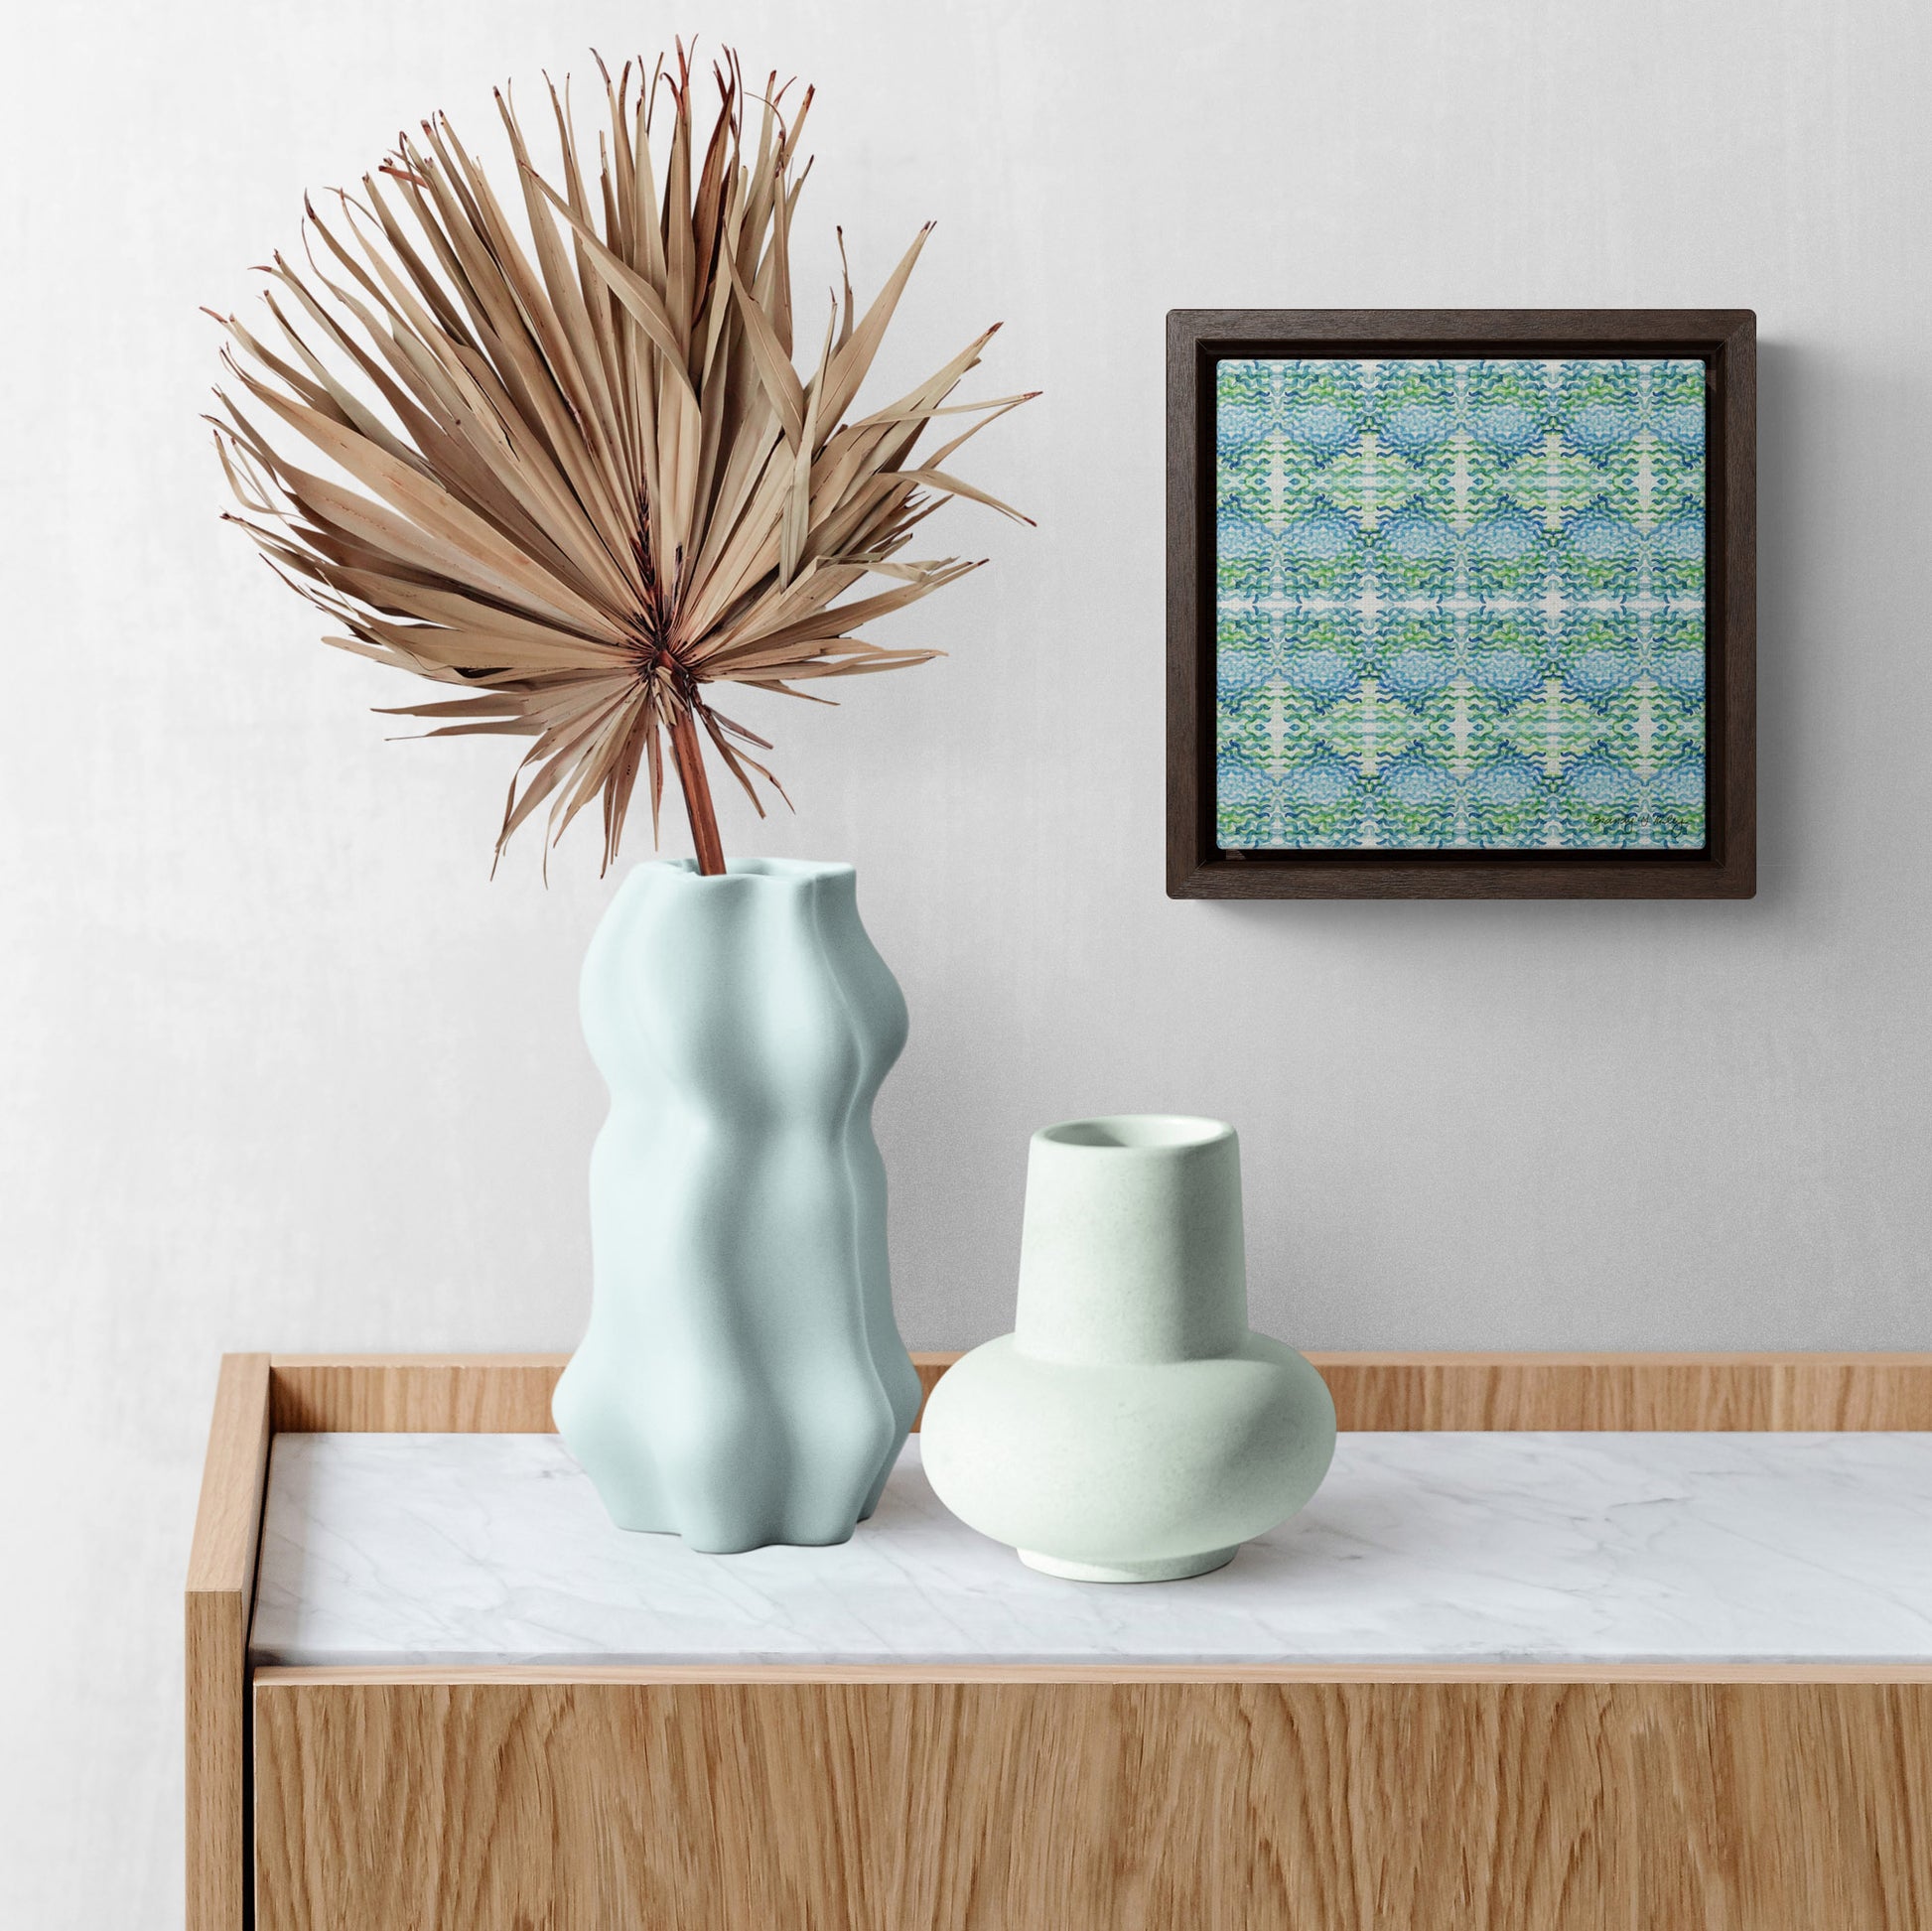 Stretched canvas featuring a blue and green abstract pattern in a black float frame, hanging on above blue vases with a palm frond